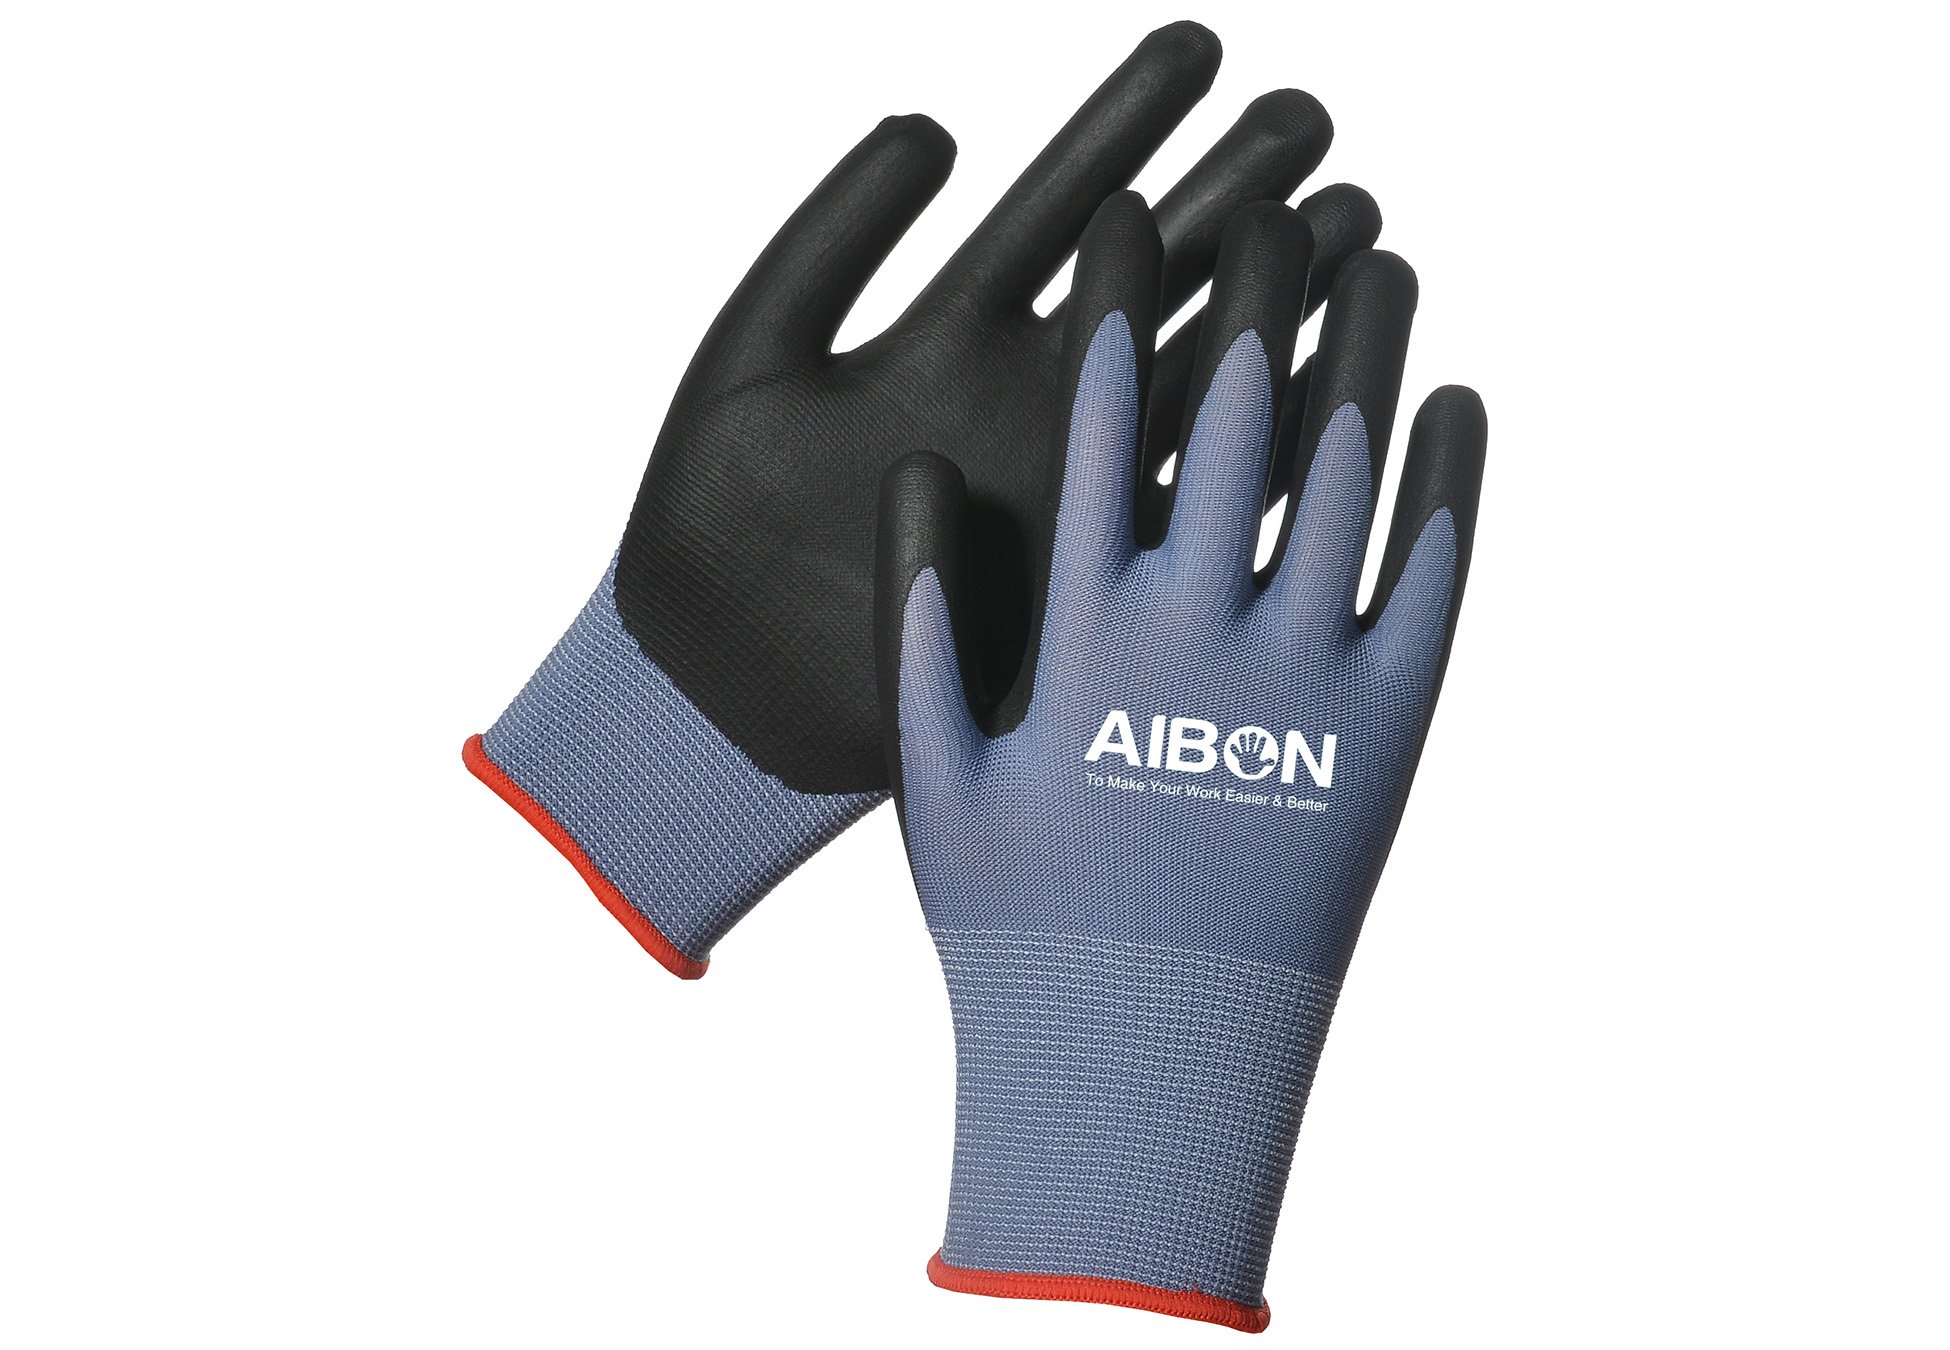 Chemical Resistant Glove